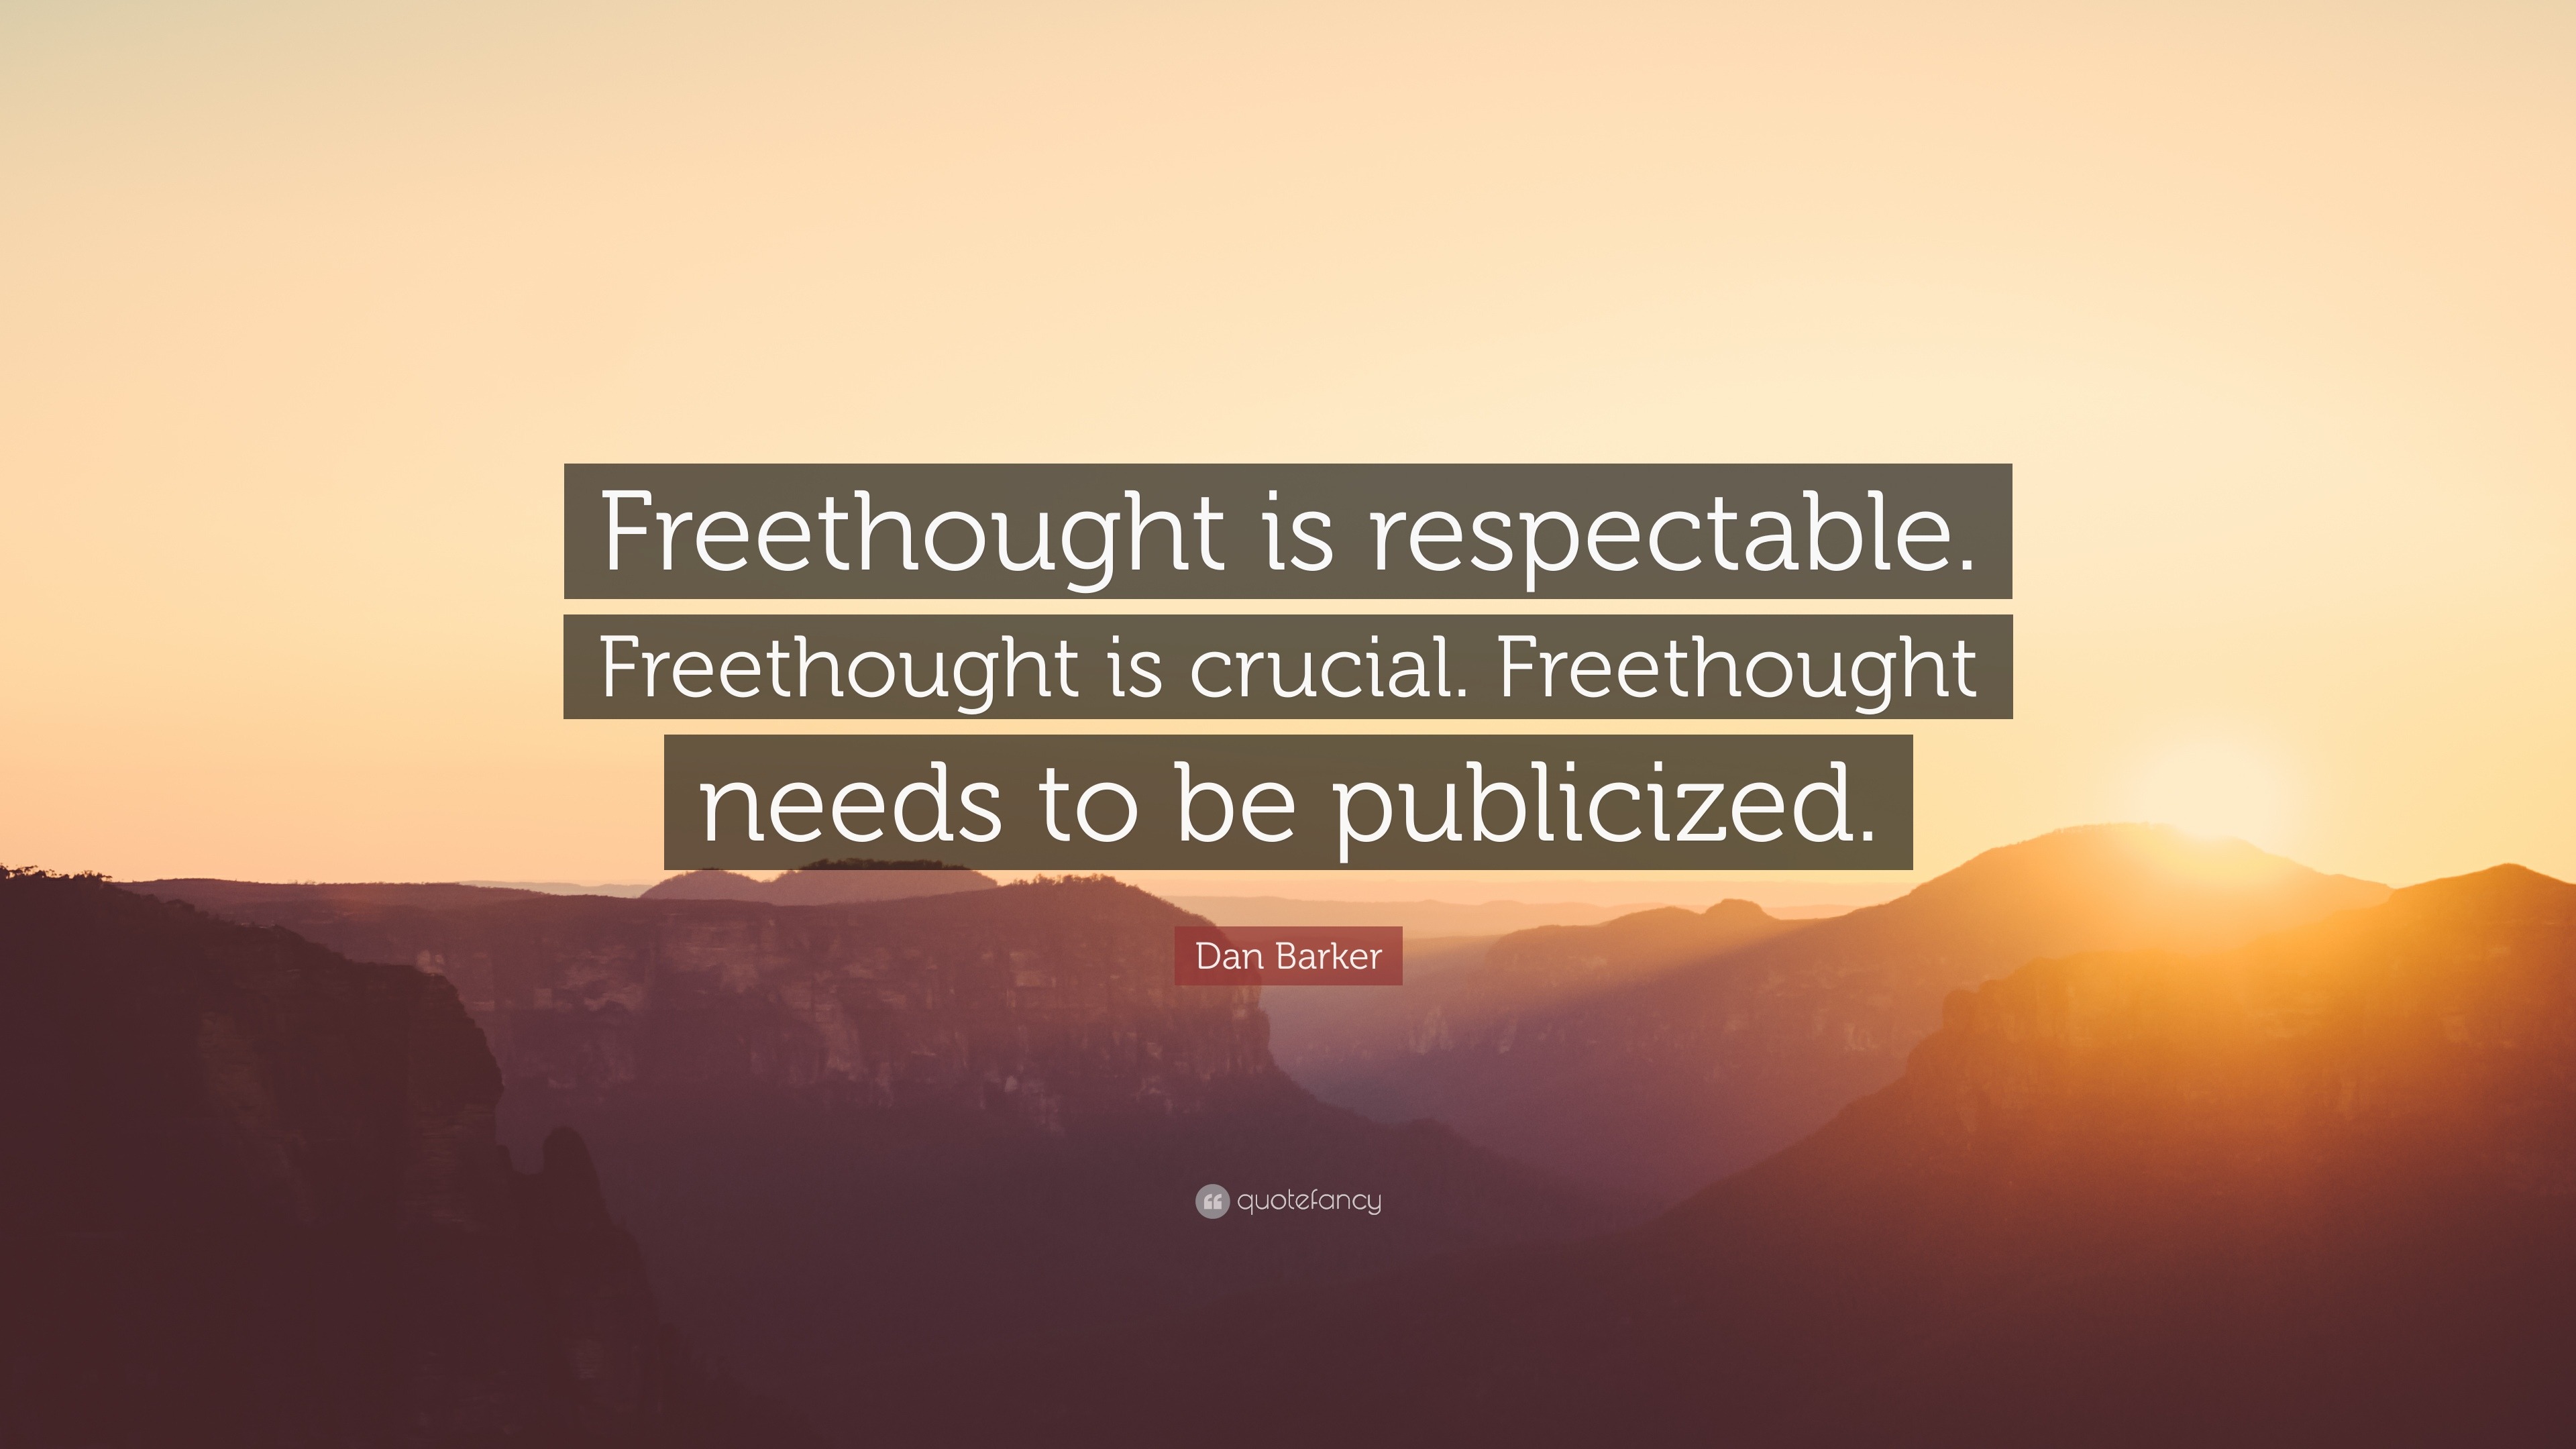 free thought quotes